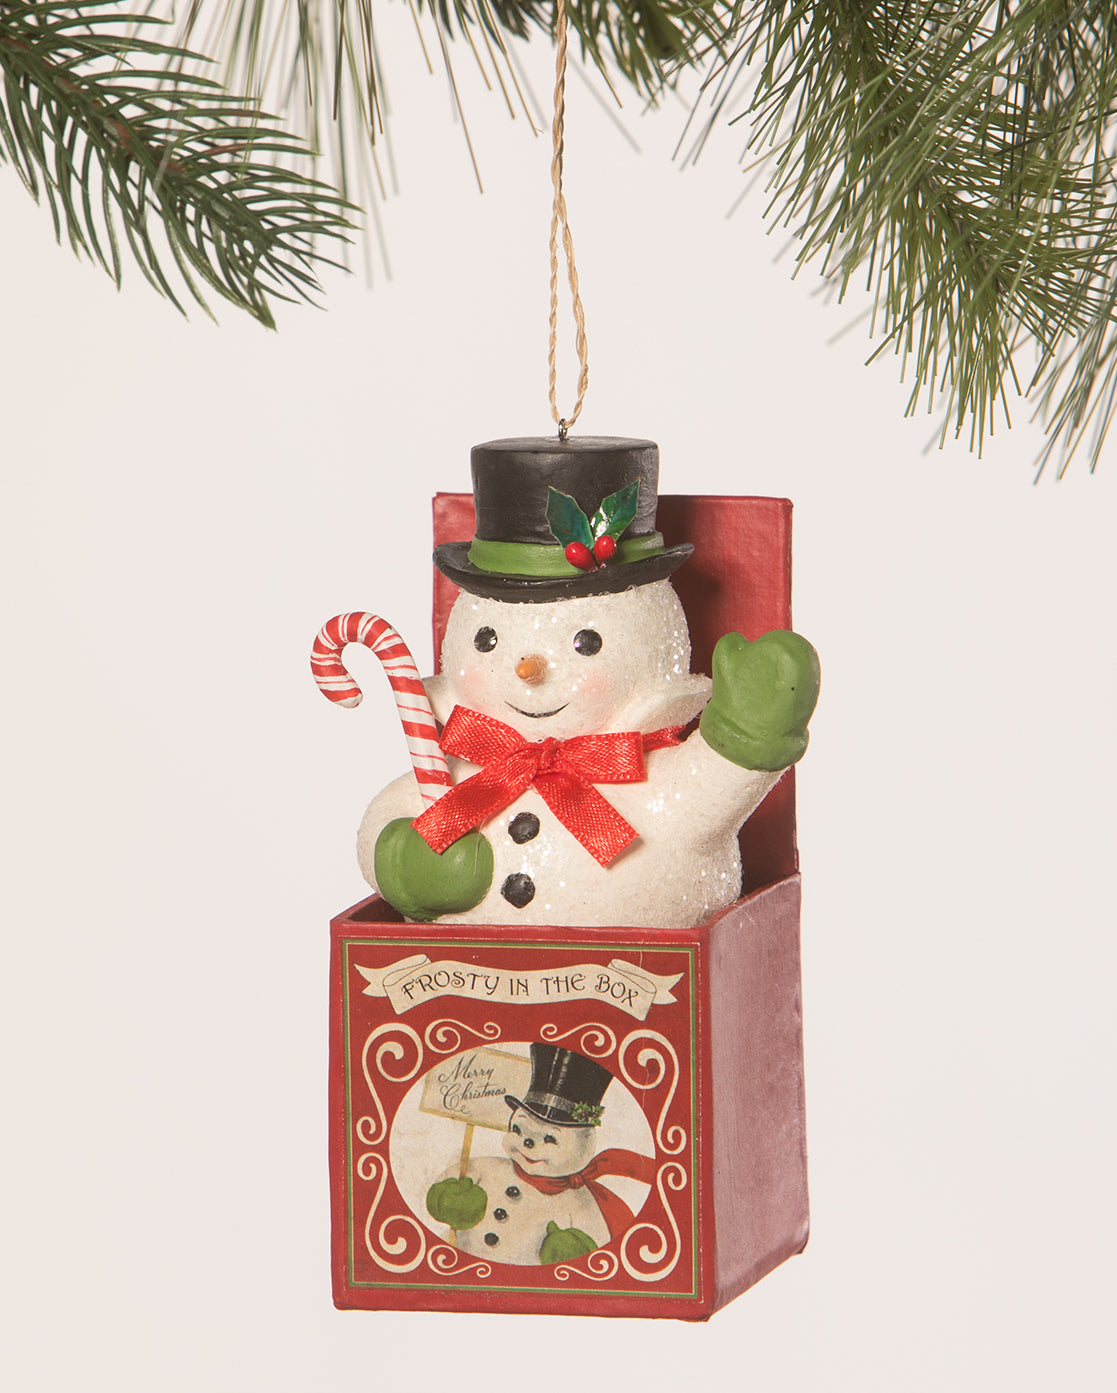 Frosty in the Box Ornament - Snowman by Bethany Lowe